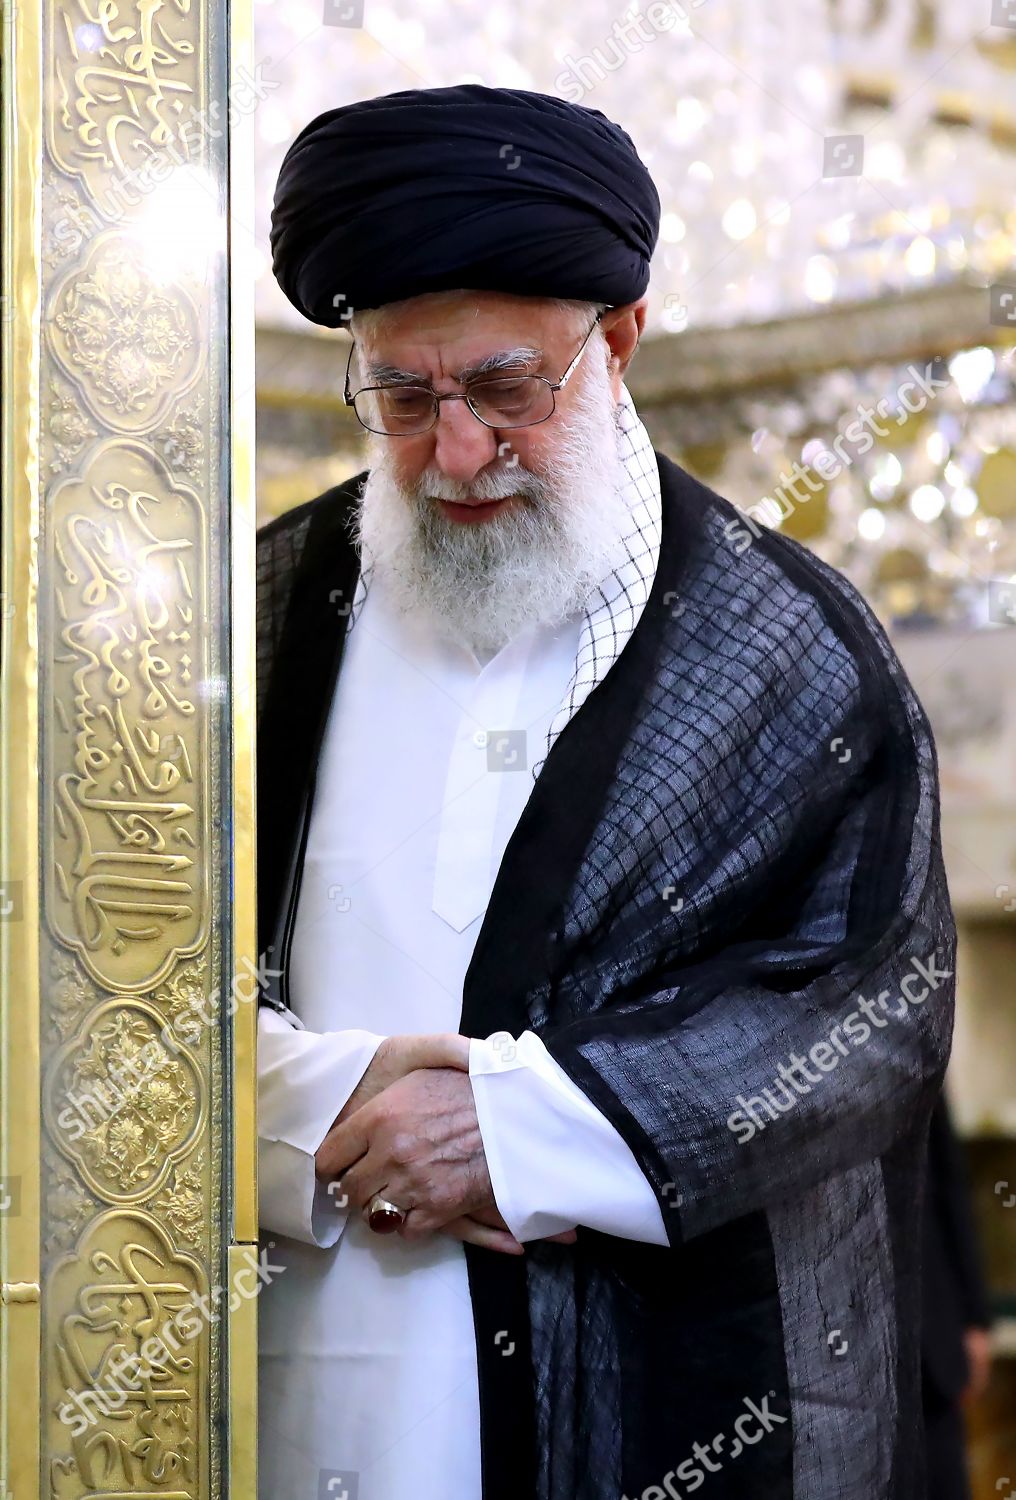 Razie ꨄ on Twitter After Imam Khomeinithe same path and creed with the  beloved Imam Khamenei continued    We have not seen him but today  clearly see the same descriptions